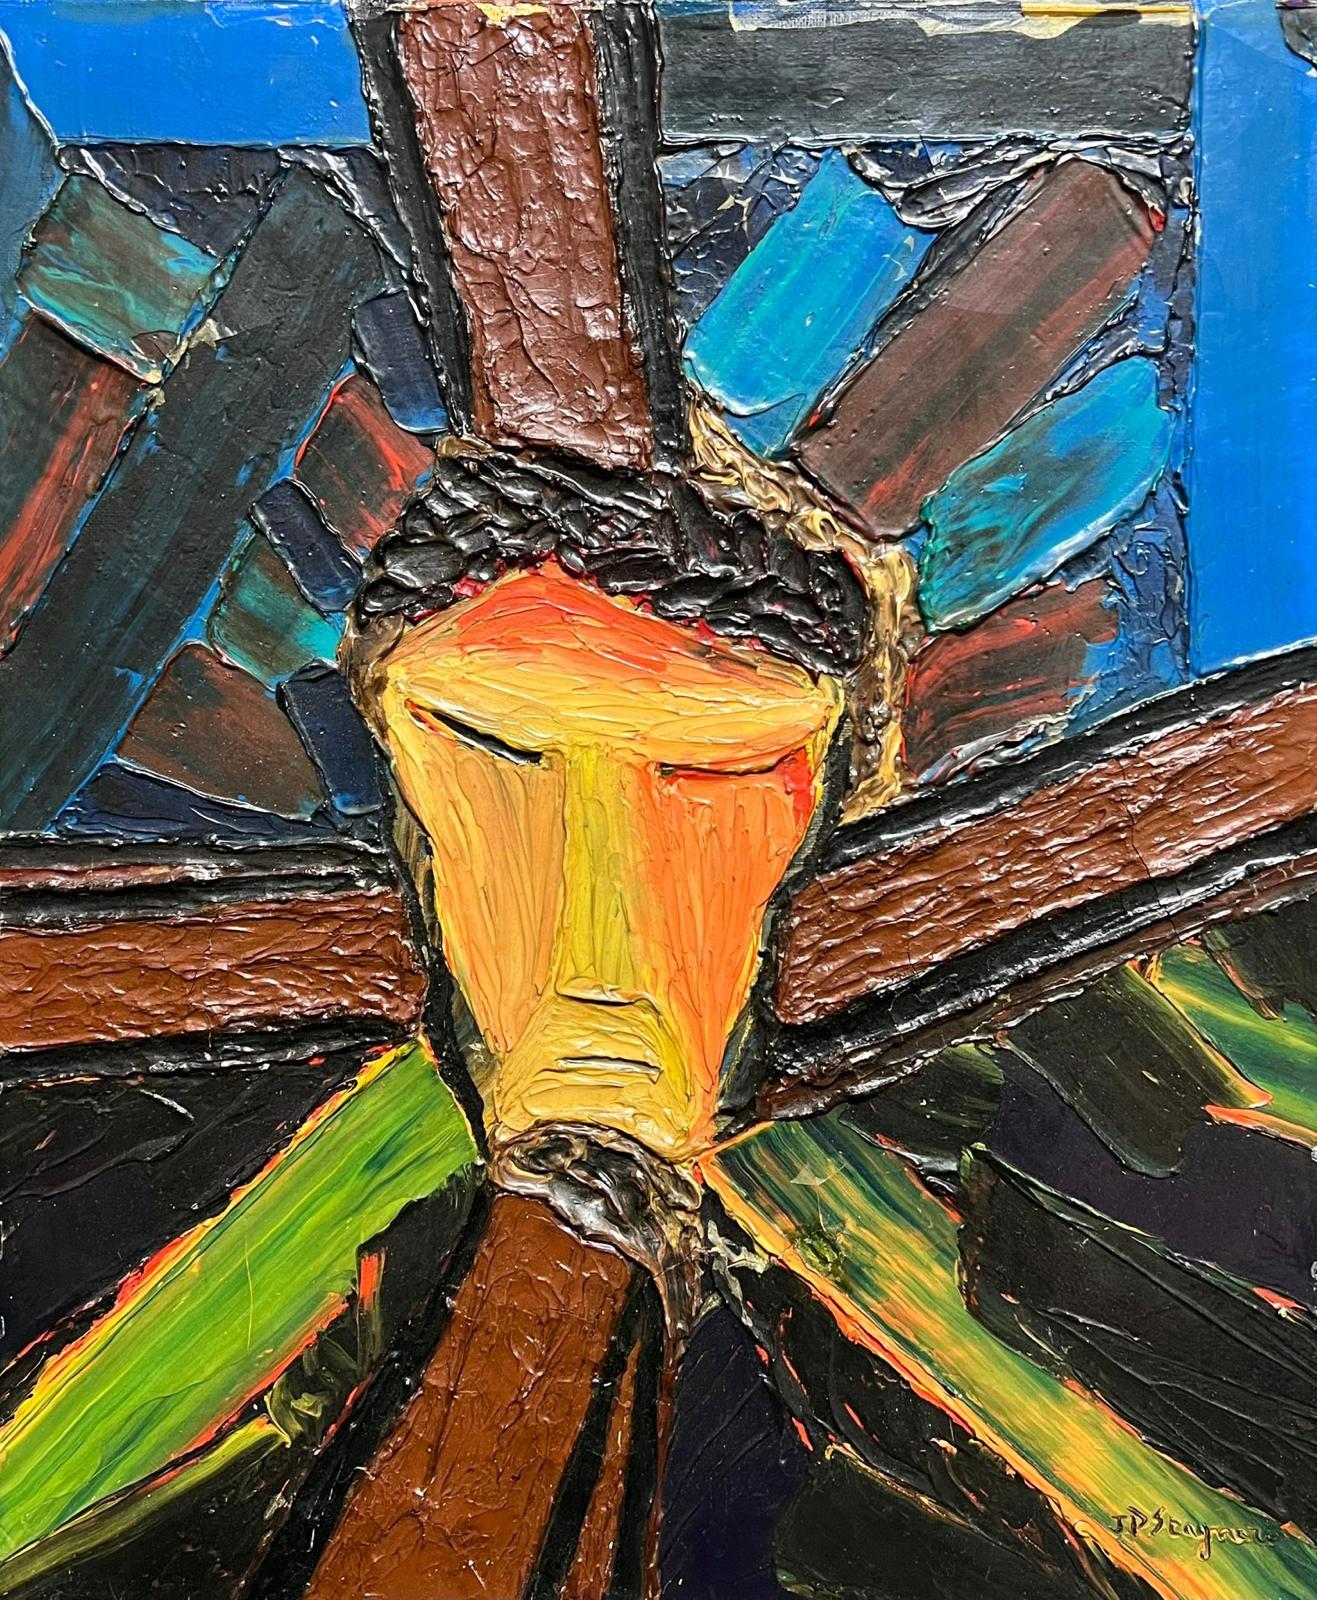 Jean Pierre Stagnaro Figurative Painting - 1960's French Expressionist Oil Painting Portrait of Christ Crucifixion